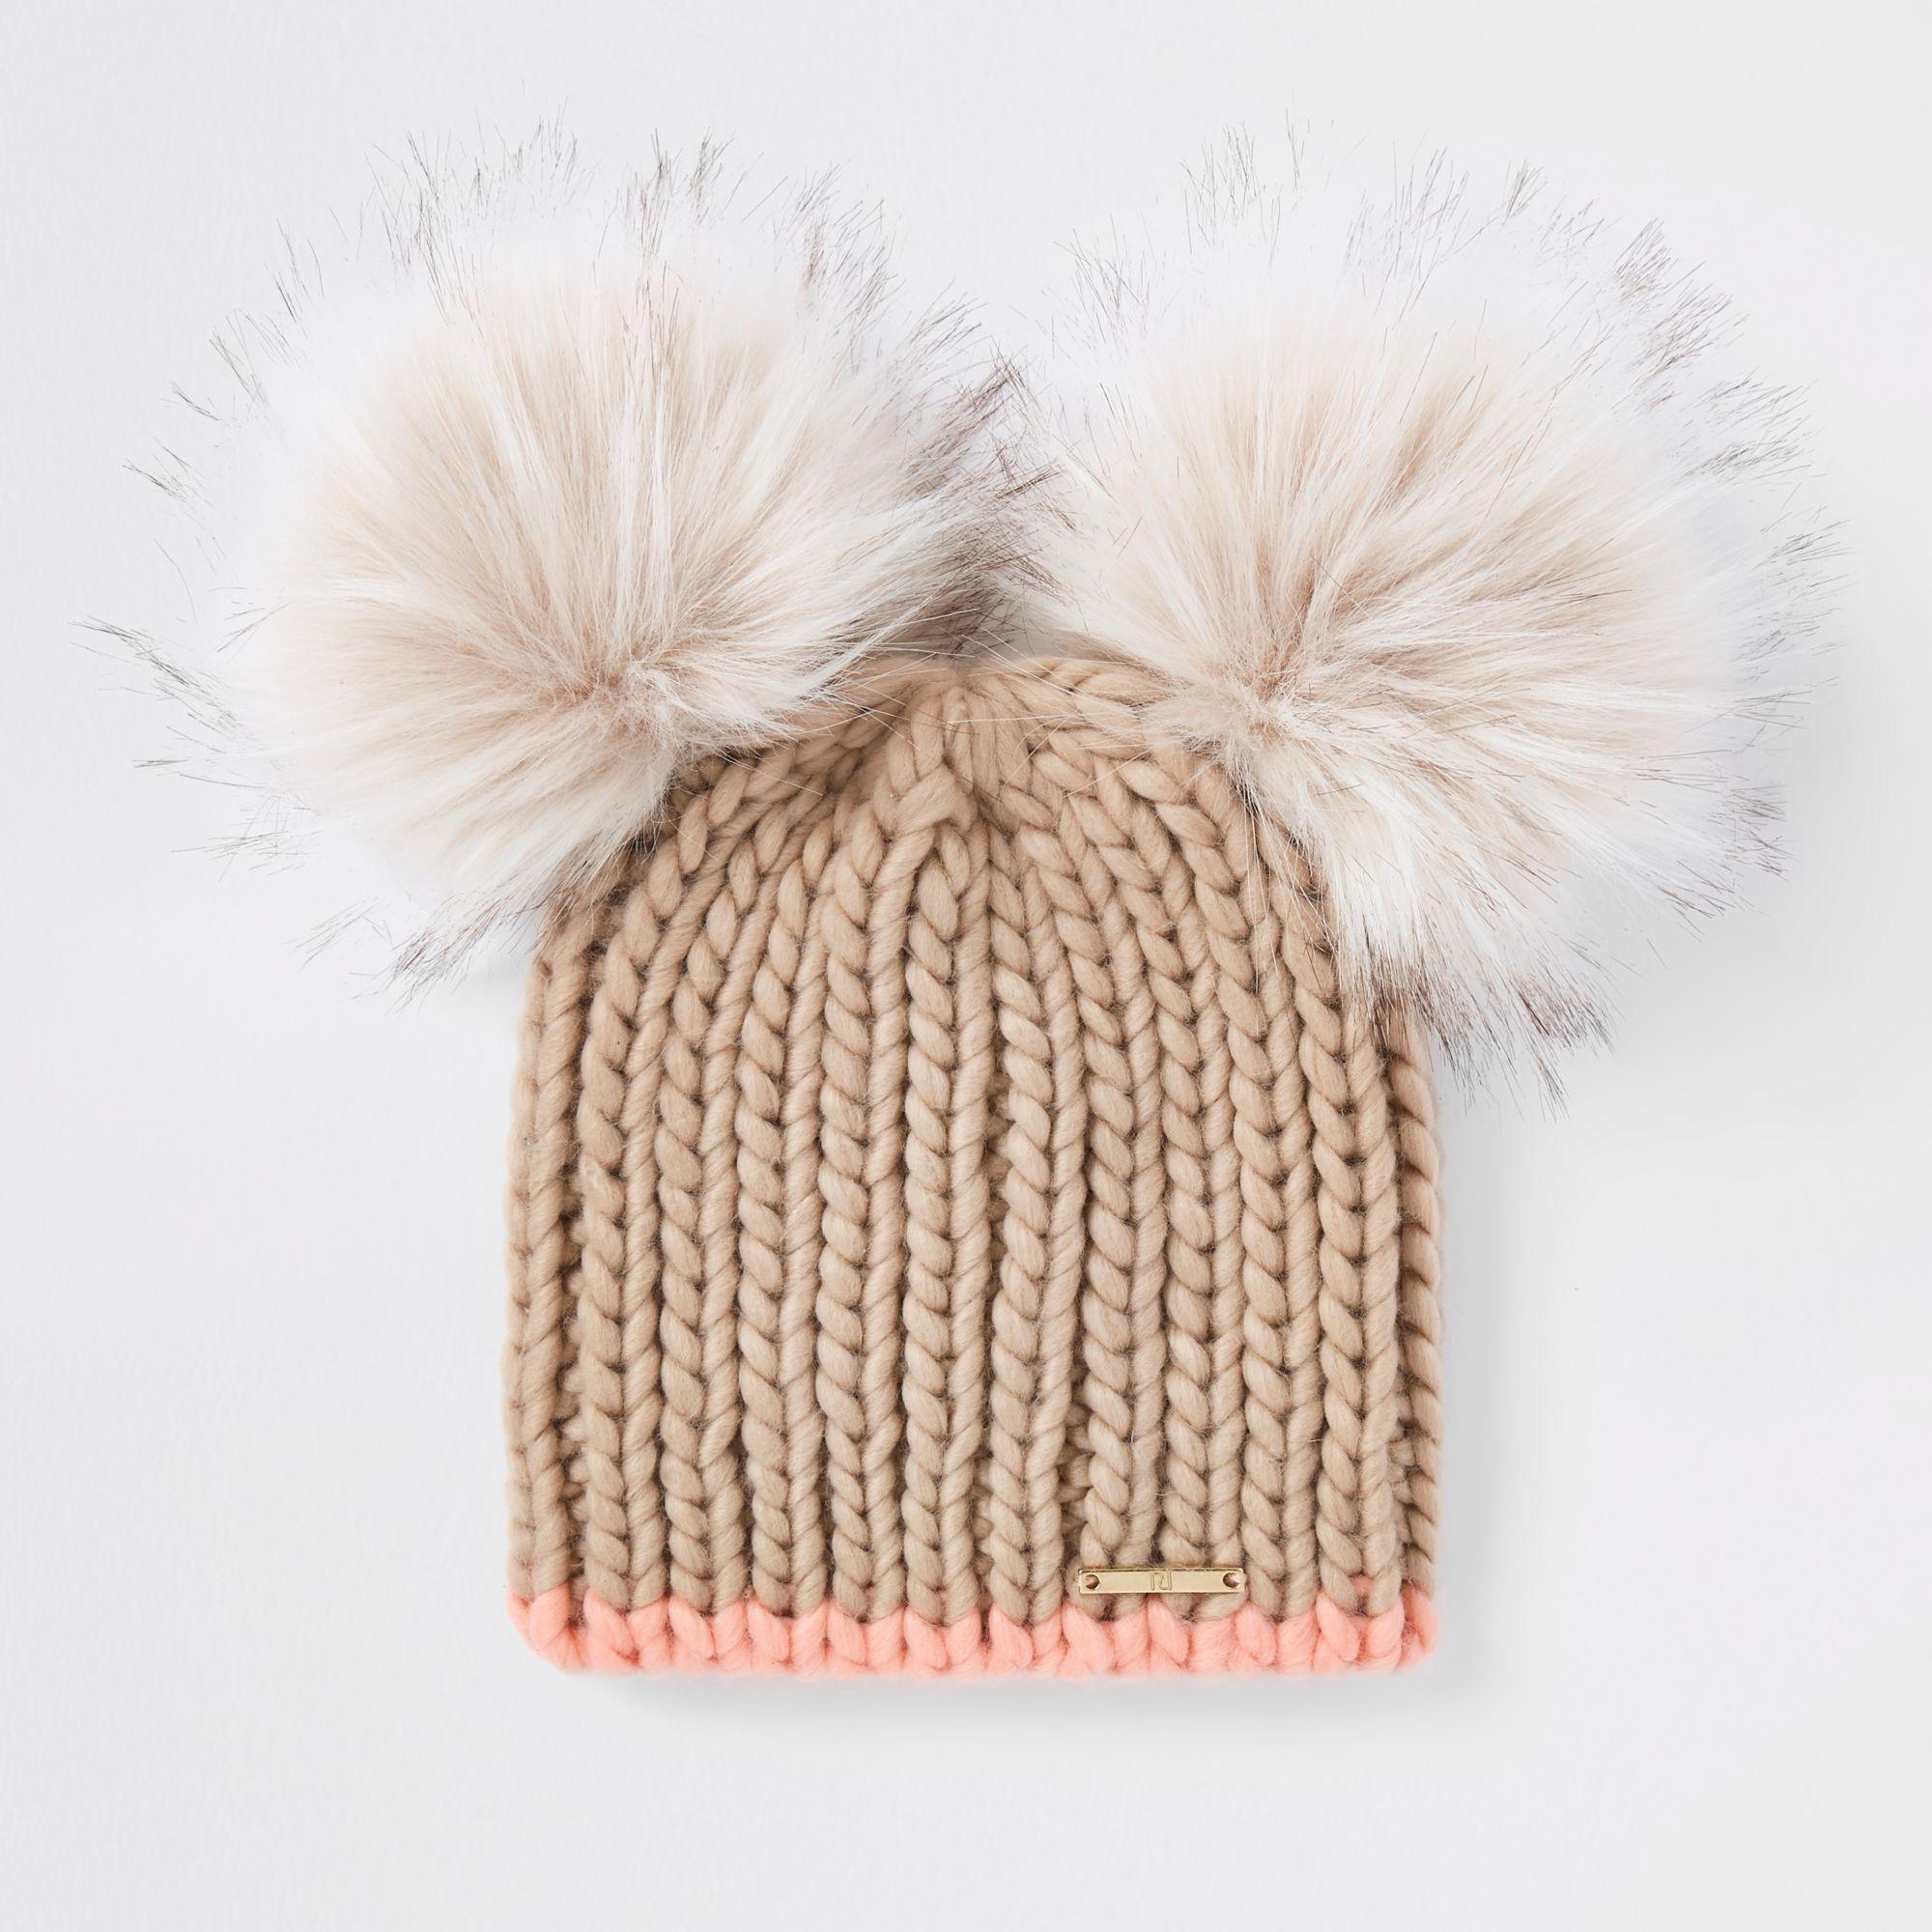 River Island Faux Fur Double Pom Pom Beanie Hat in Natural - Lyst